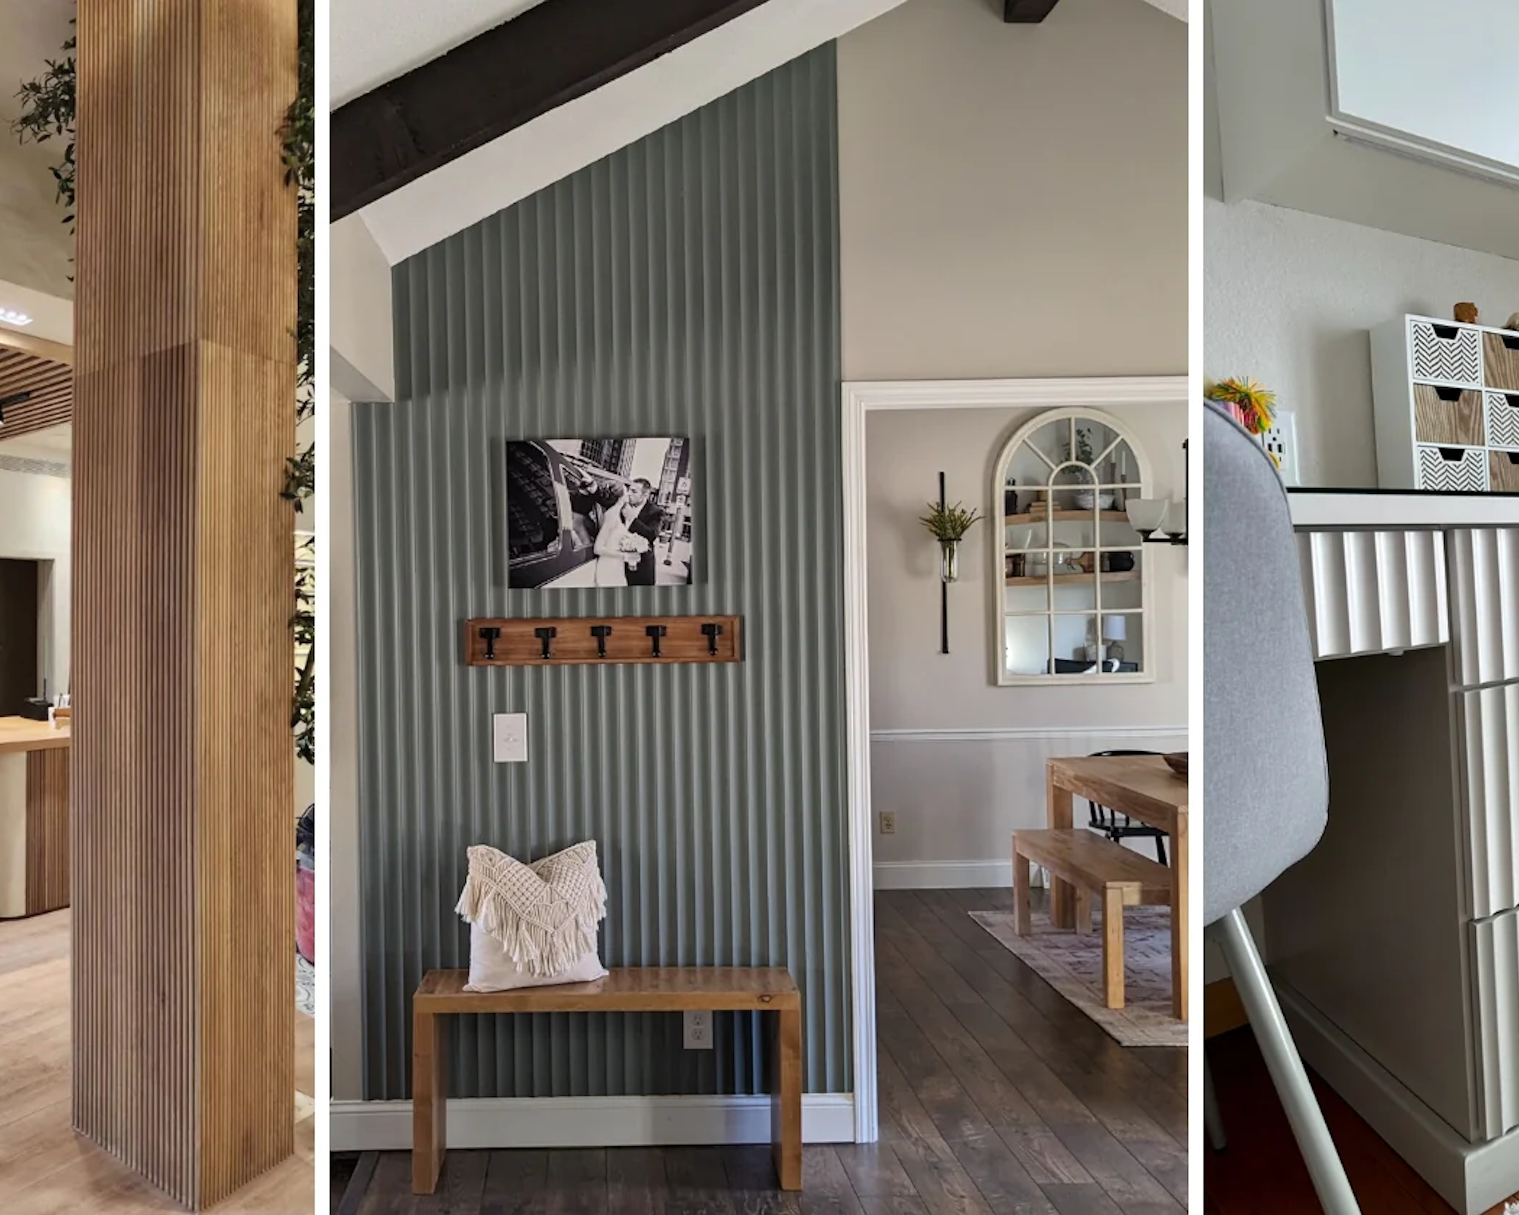 three different rooms pictured with each highlighting different ways to style wood wall panels